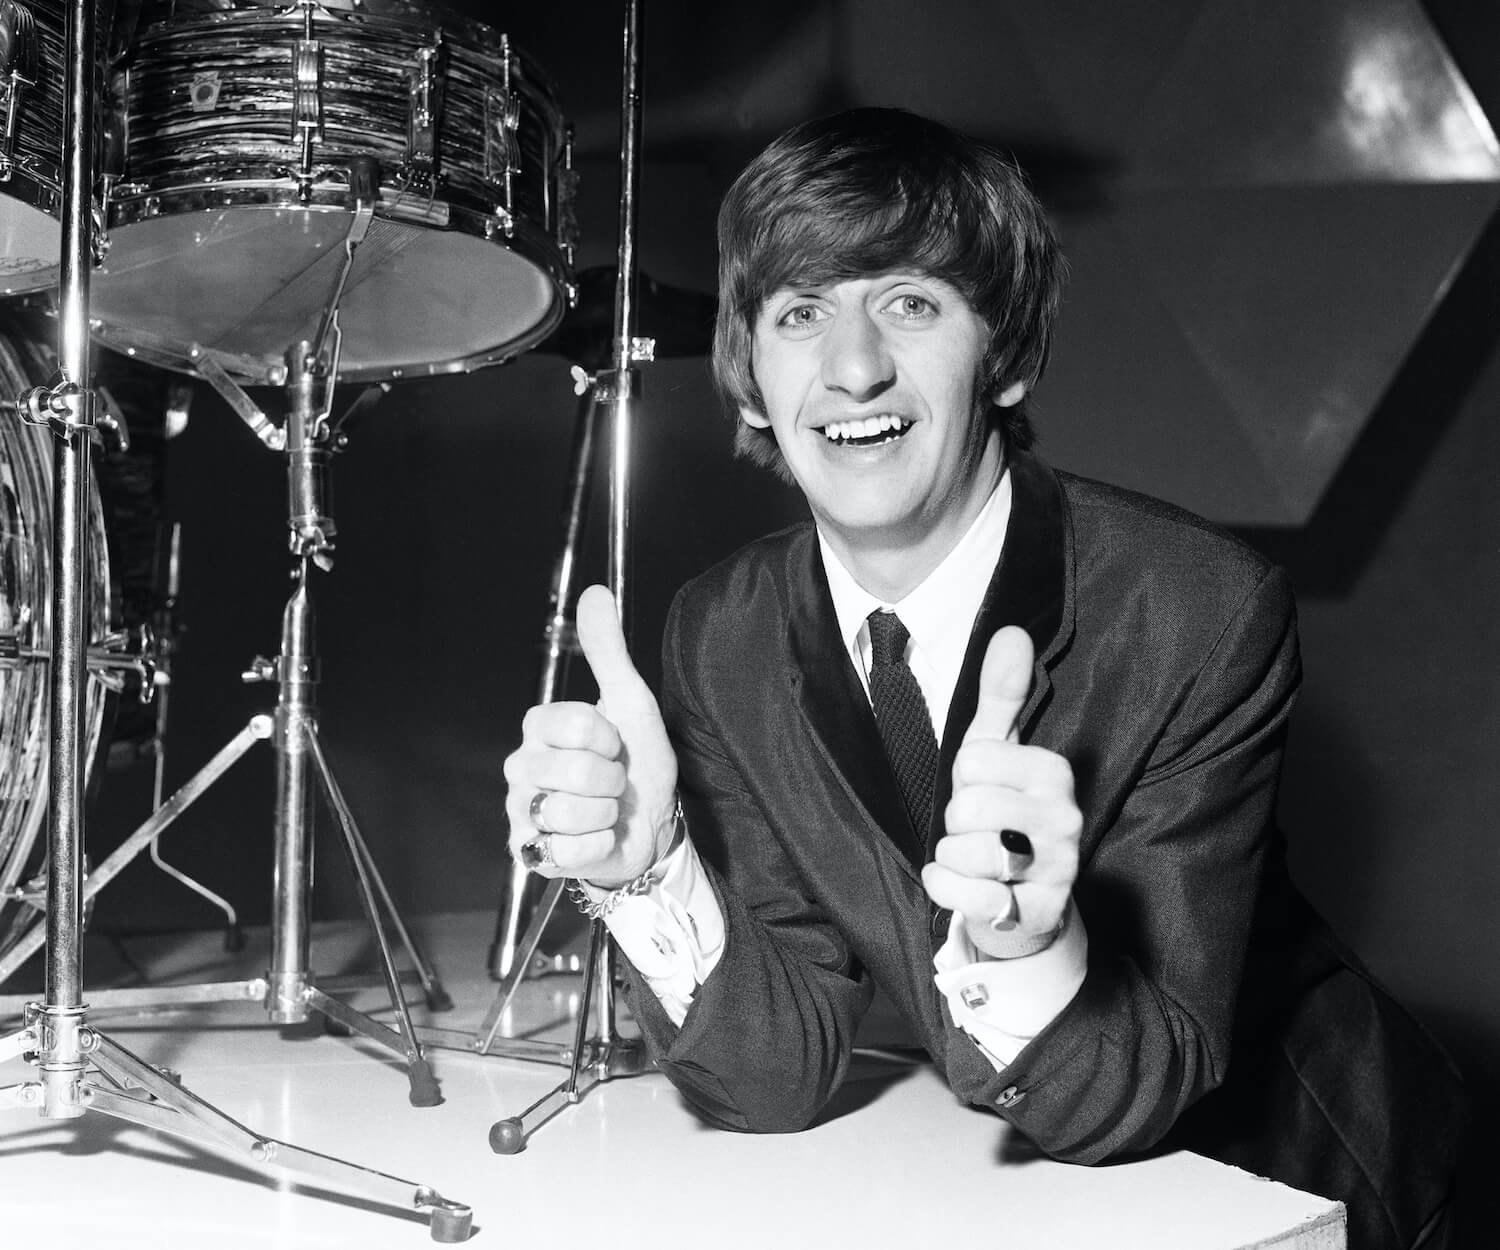 Beatles drummer Ringo Starr smiles while standing near his kit during a photo shoot on his 24th birthday on July 7, 1964.